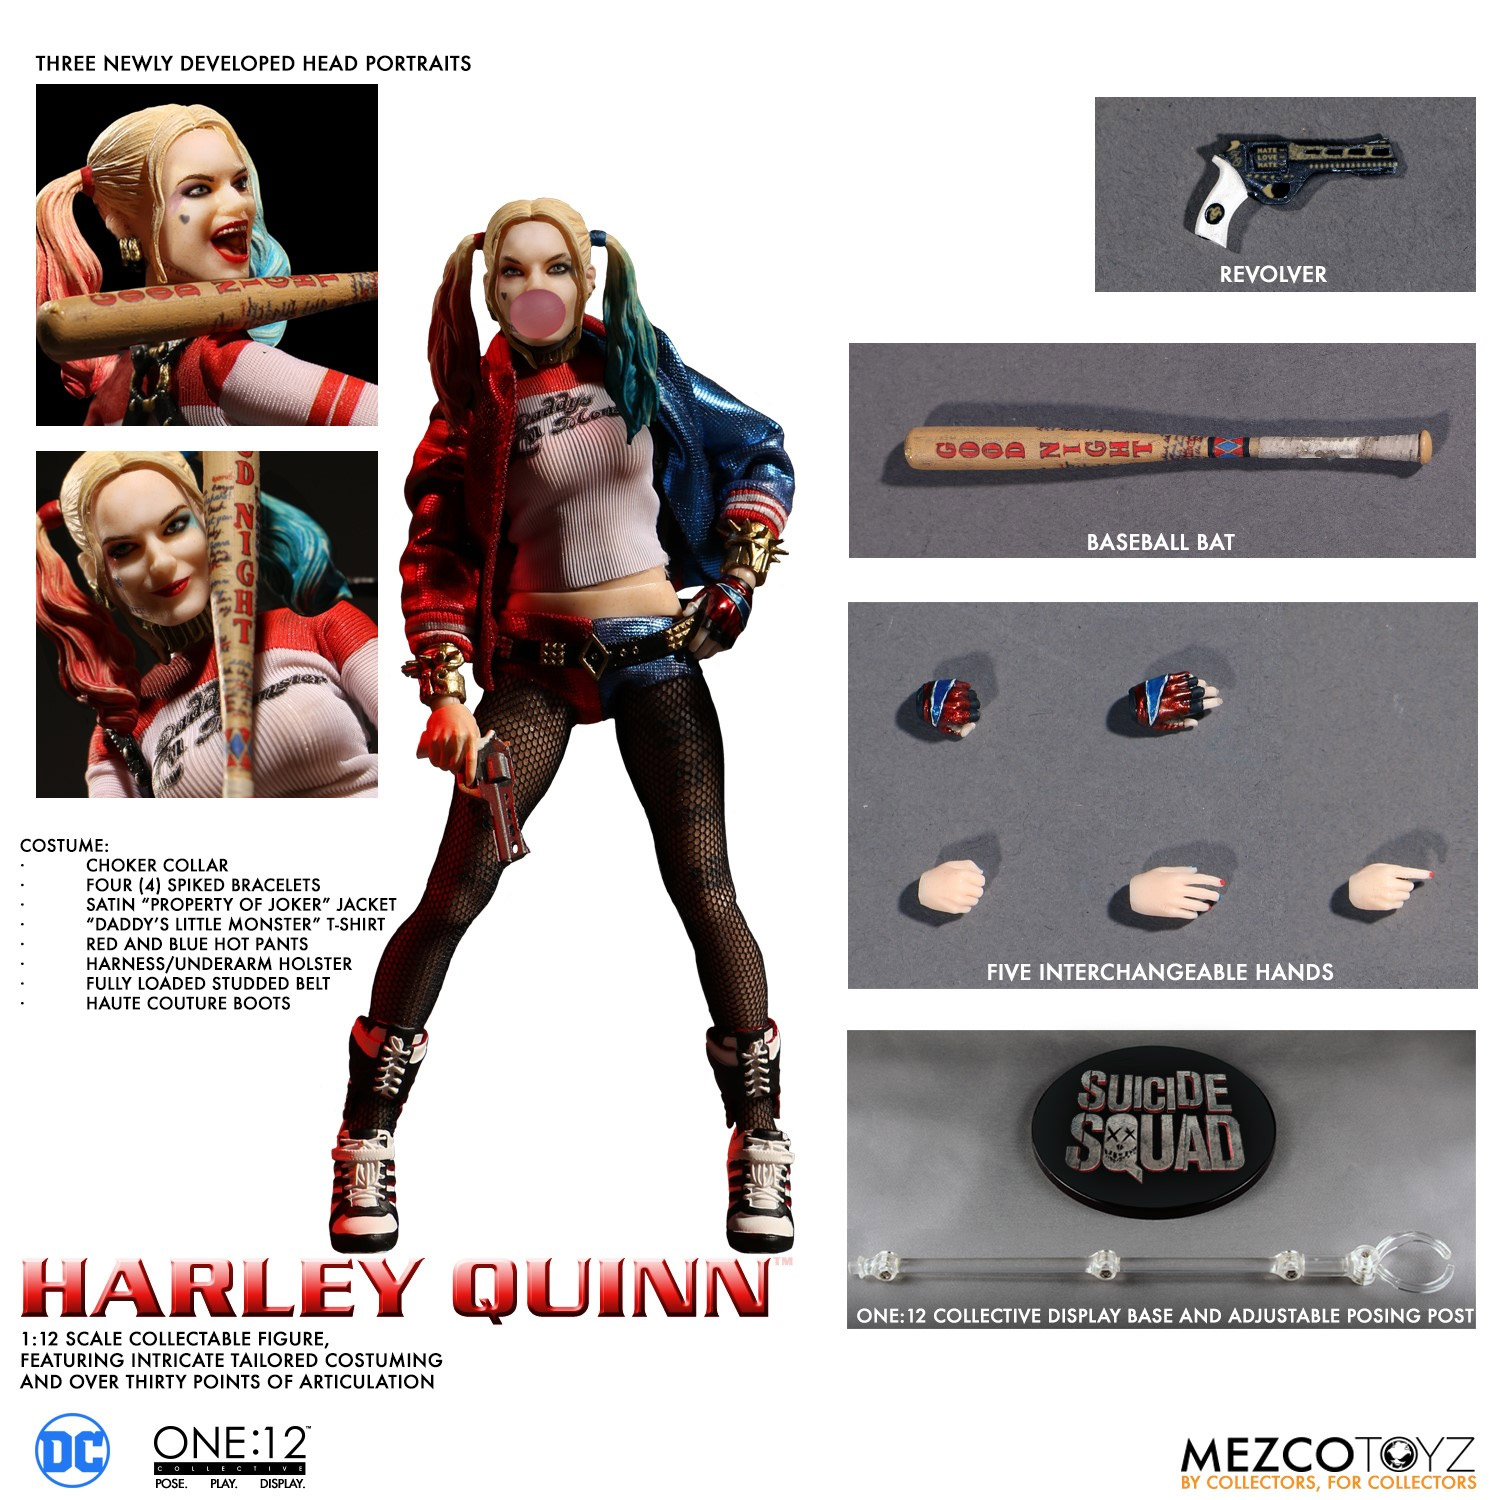 Official Harley Quinn Head Goblet by Monogram DC Comics 